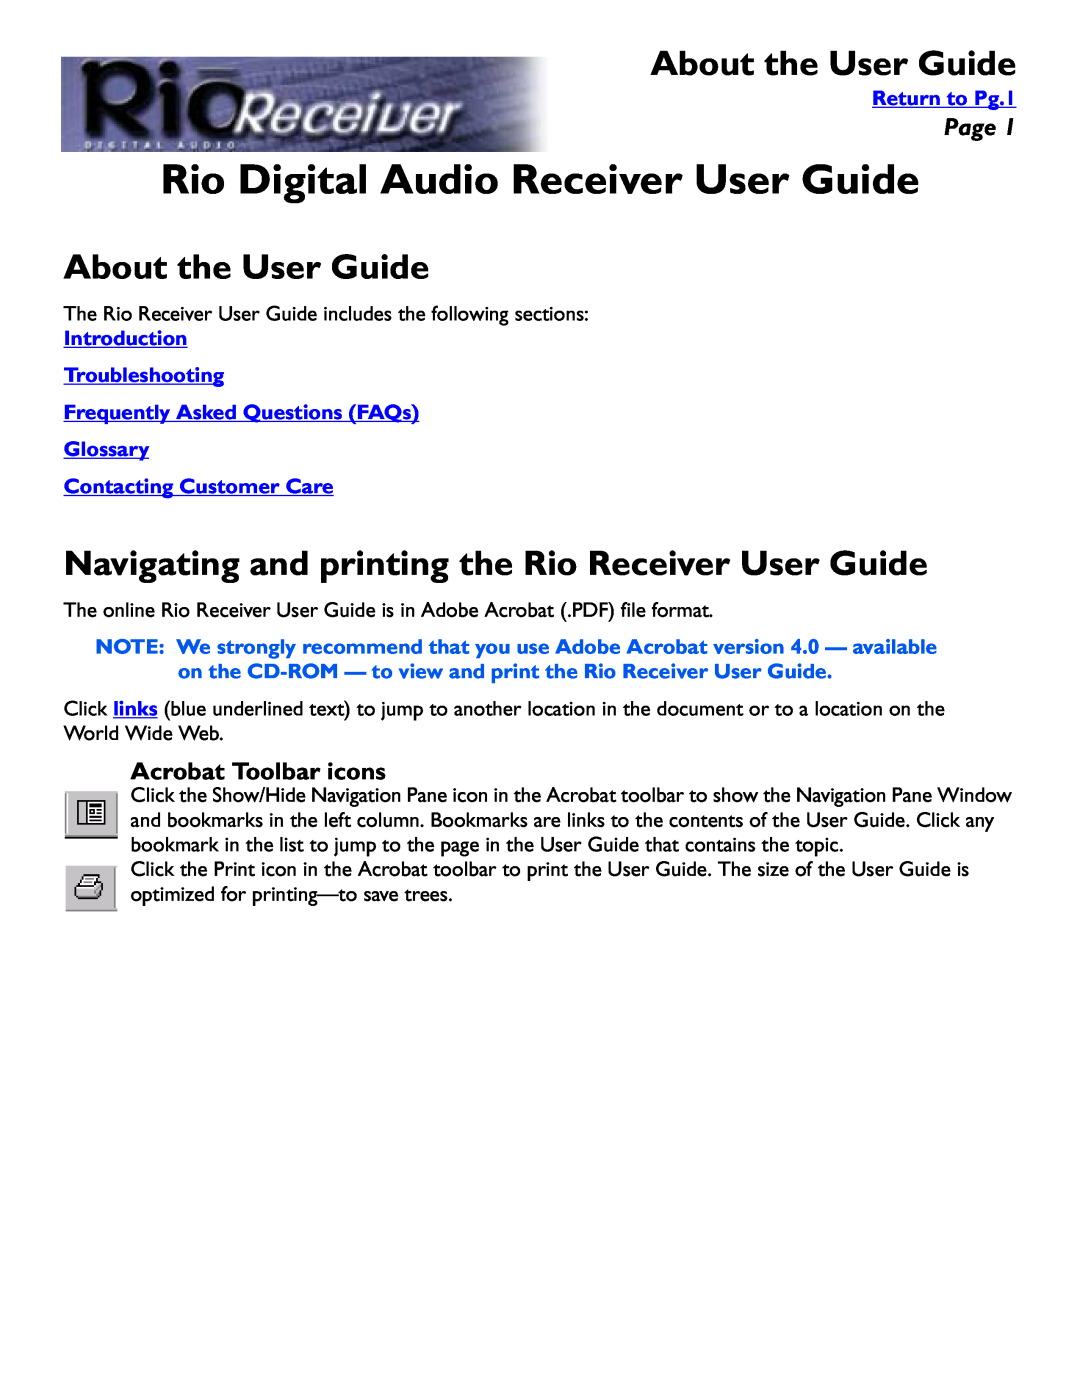 Rio Audio manual About the User Guide, Rio Digital Audio Receiver User Guide, Page, Acrobat Toolbar icons 